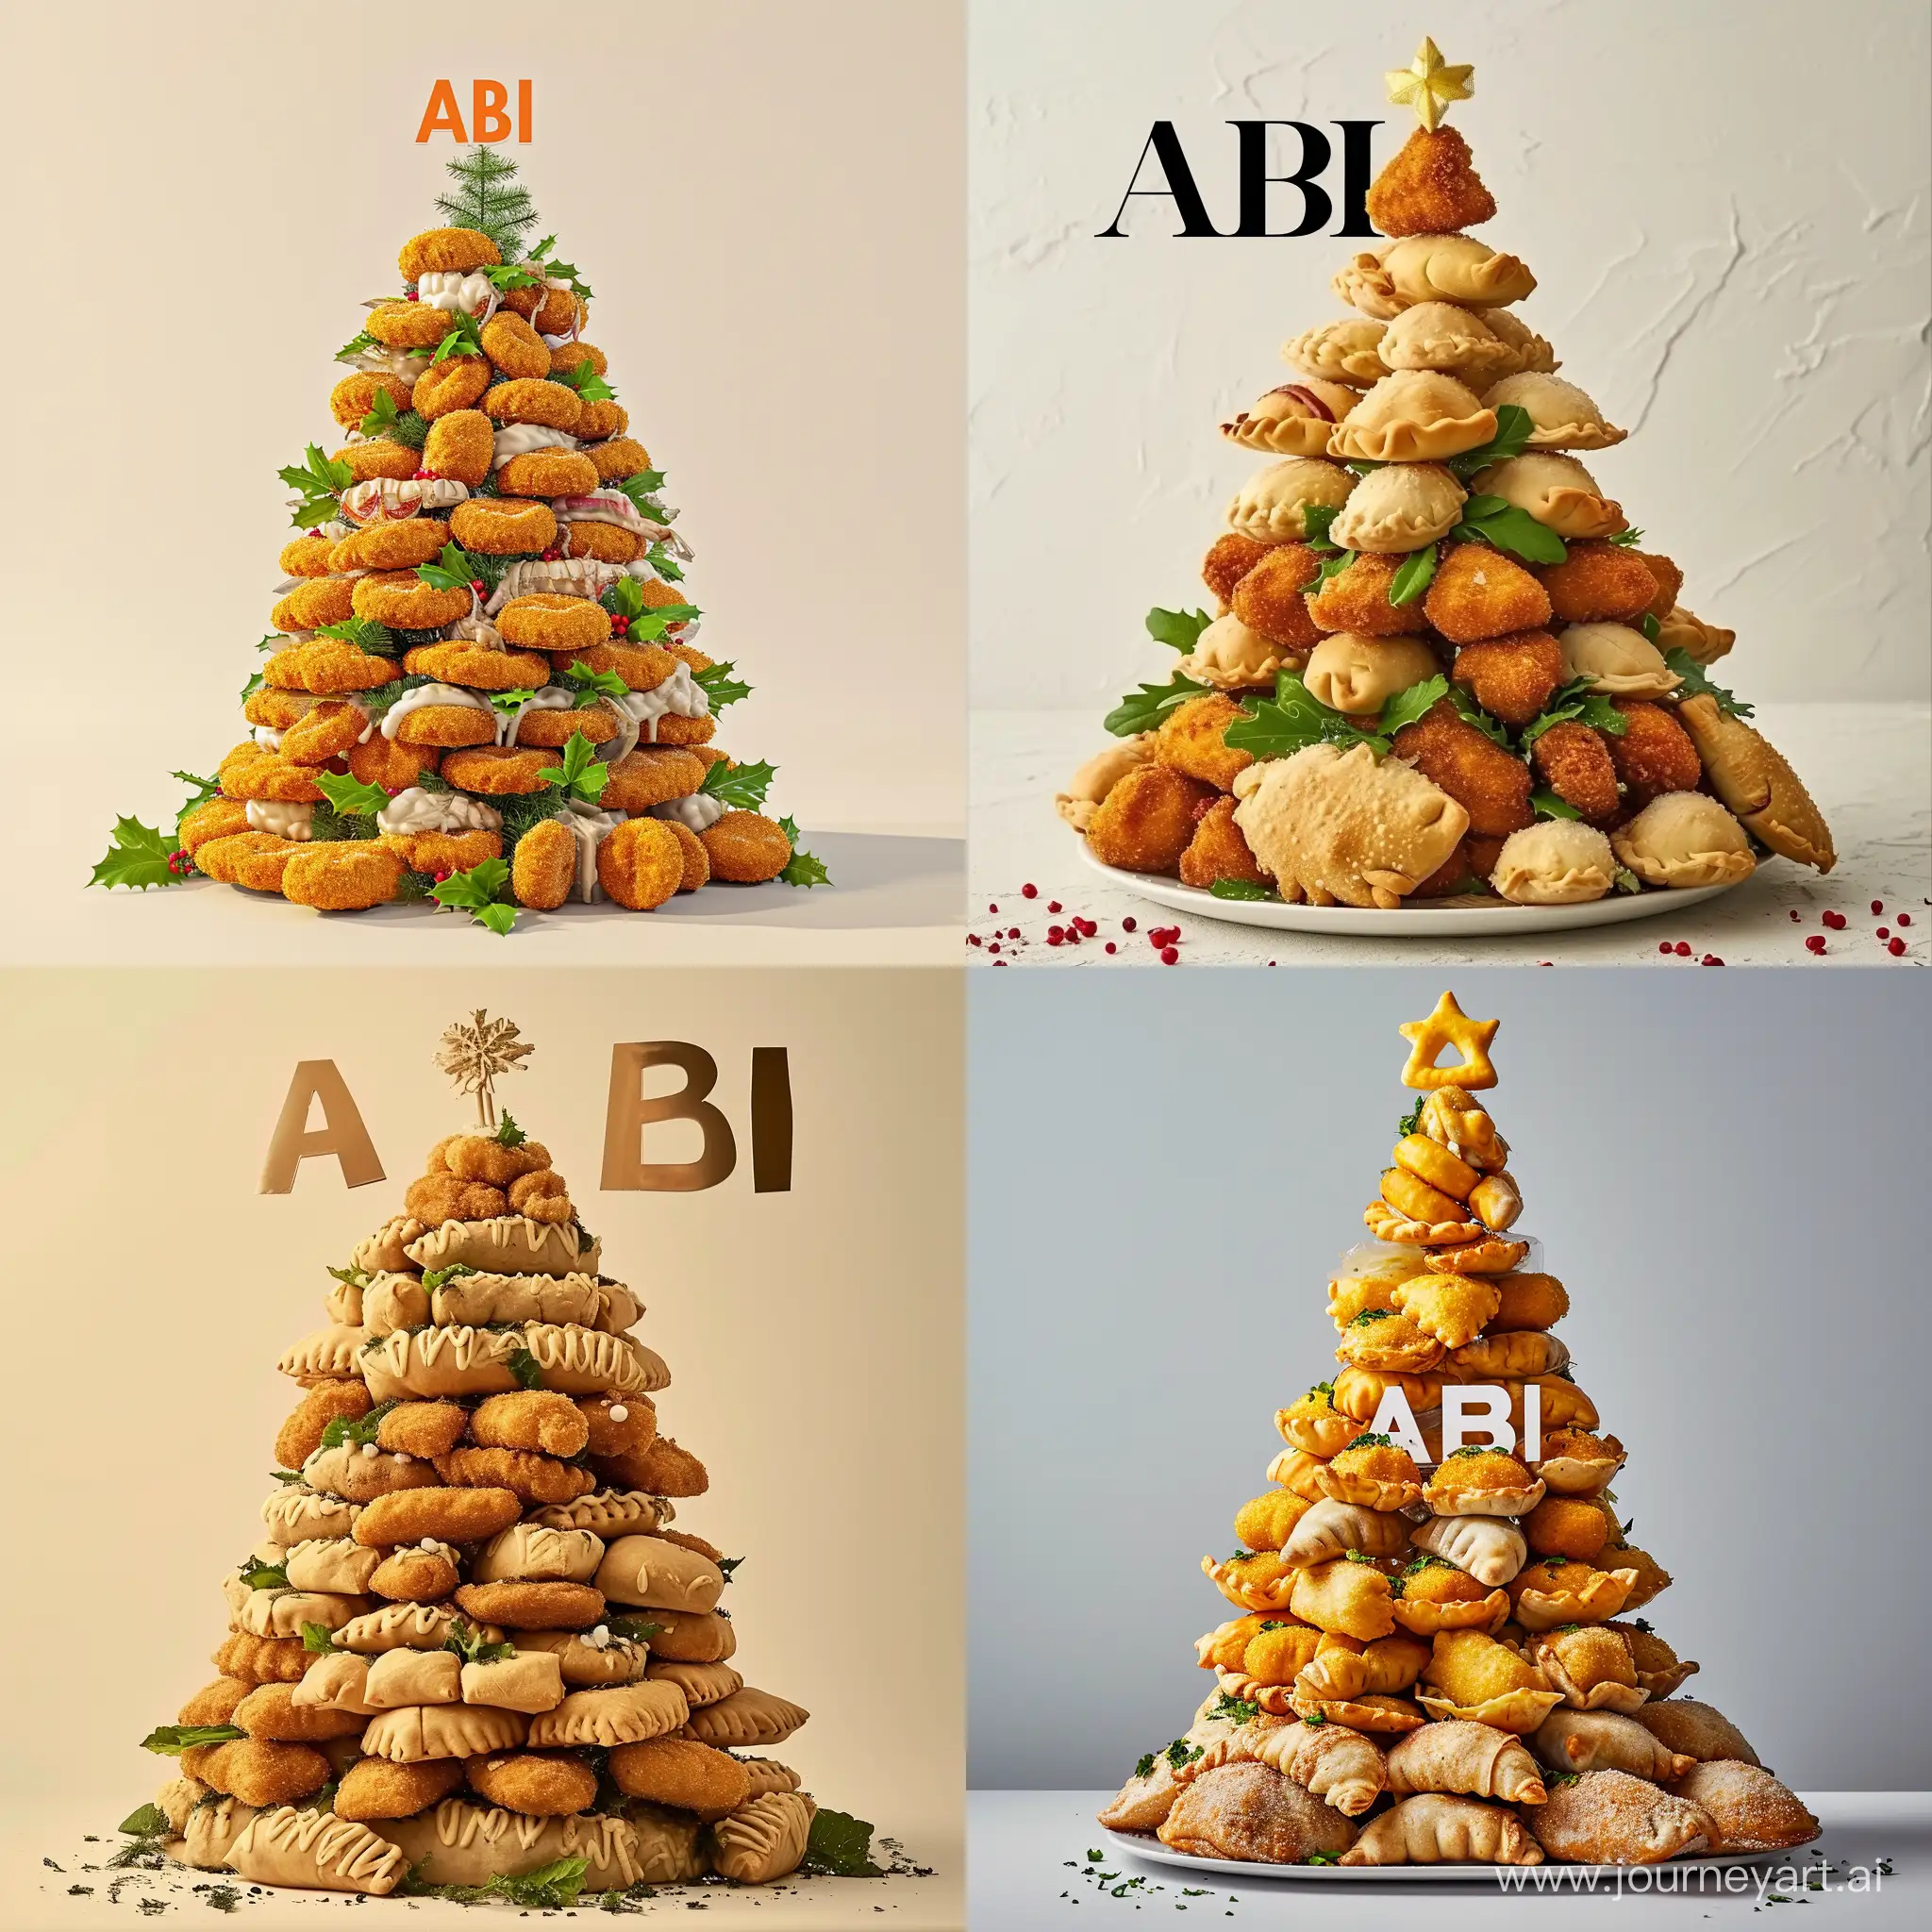 Festive-Christmas-Tree-adorned-with-Culinary-Delights-and-ABI-Text